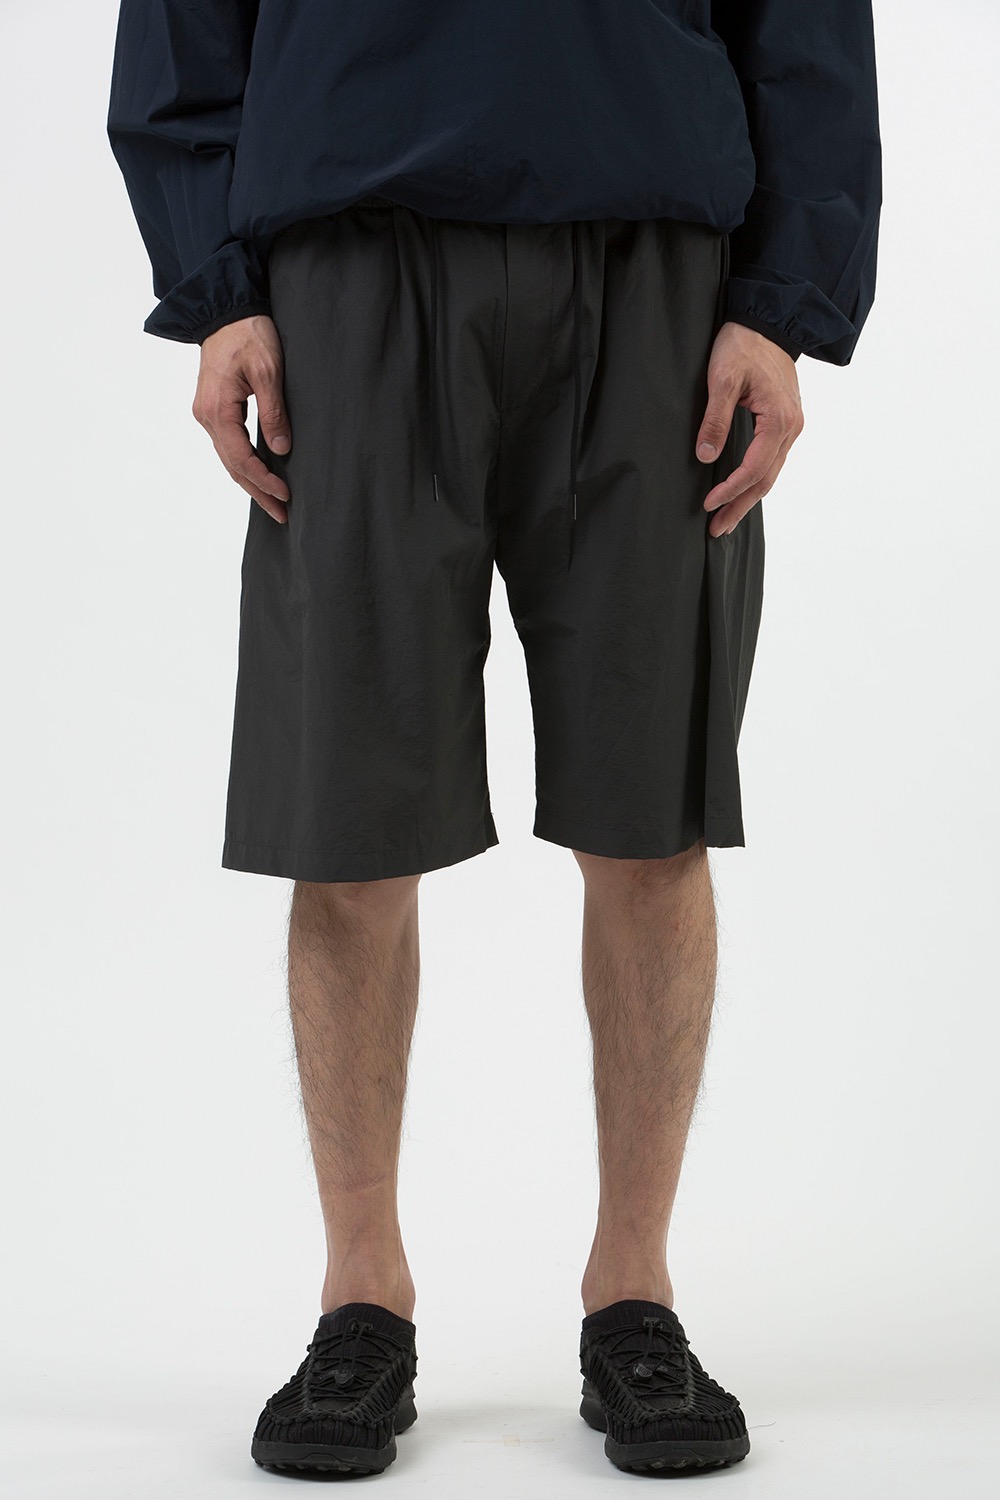 PACKABLE TRAVELLER SHORTS CHARCOAL